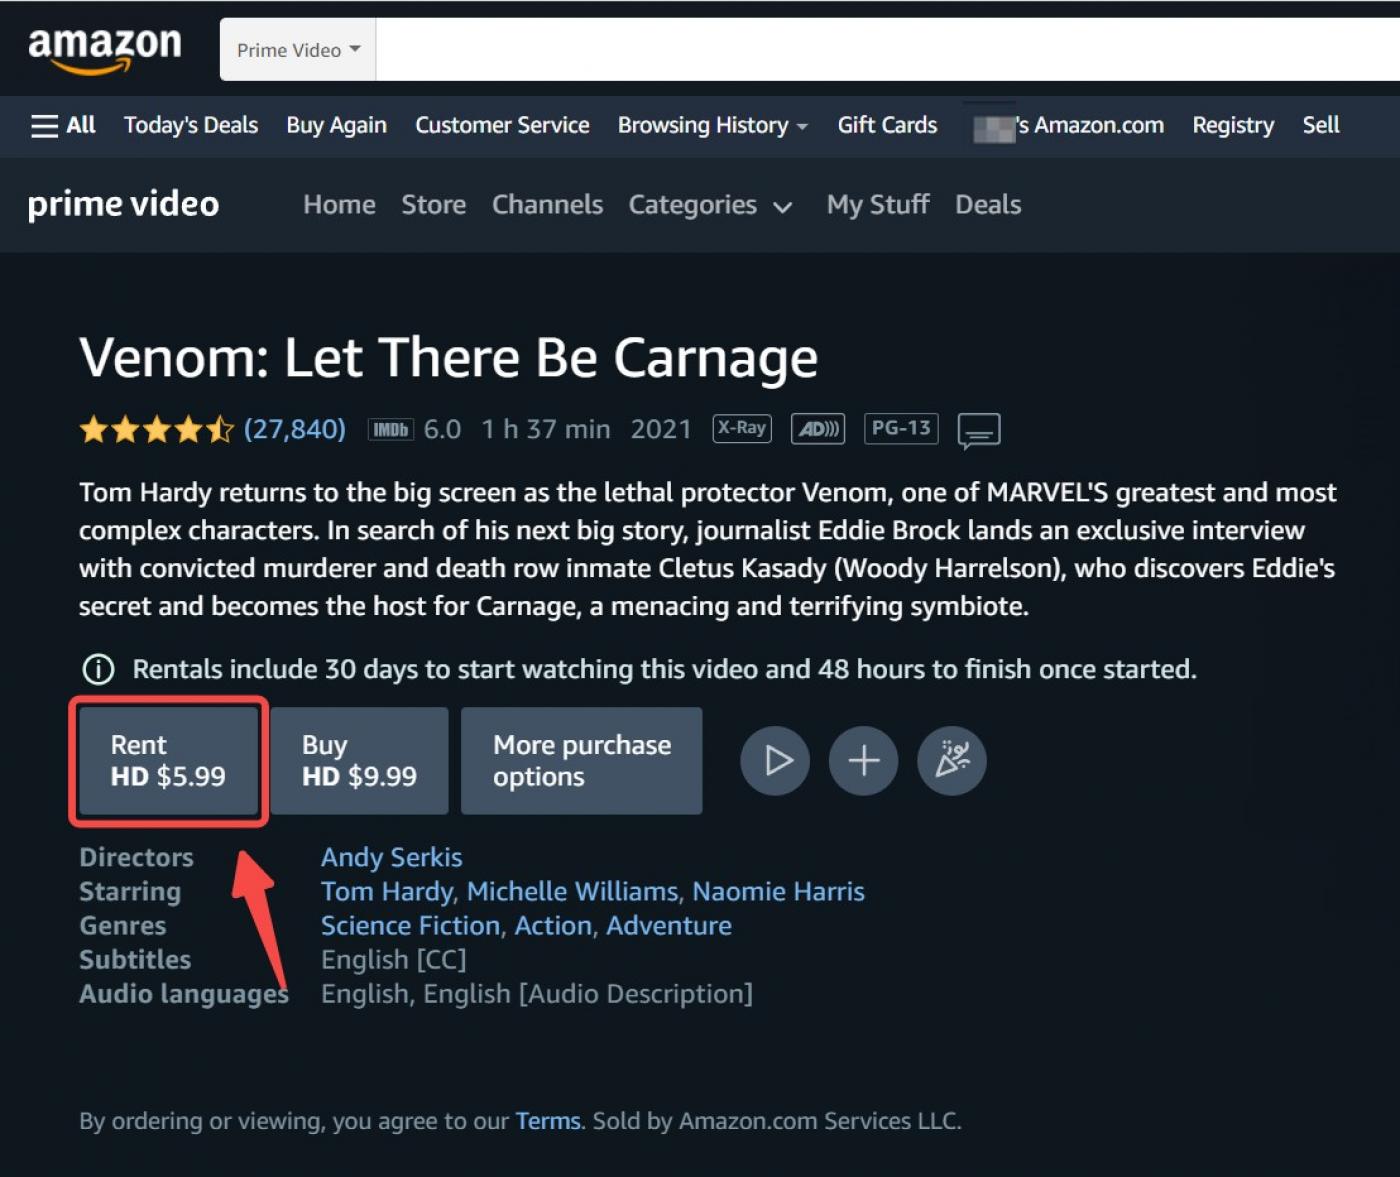 Everything You Need to Know About Renting a Movie on Amazon